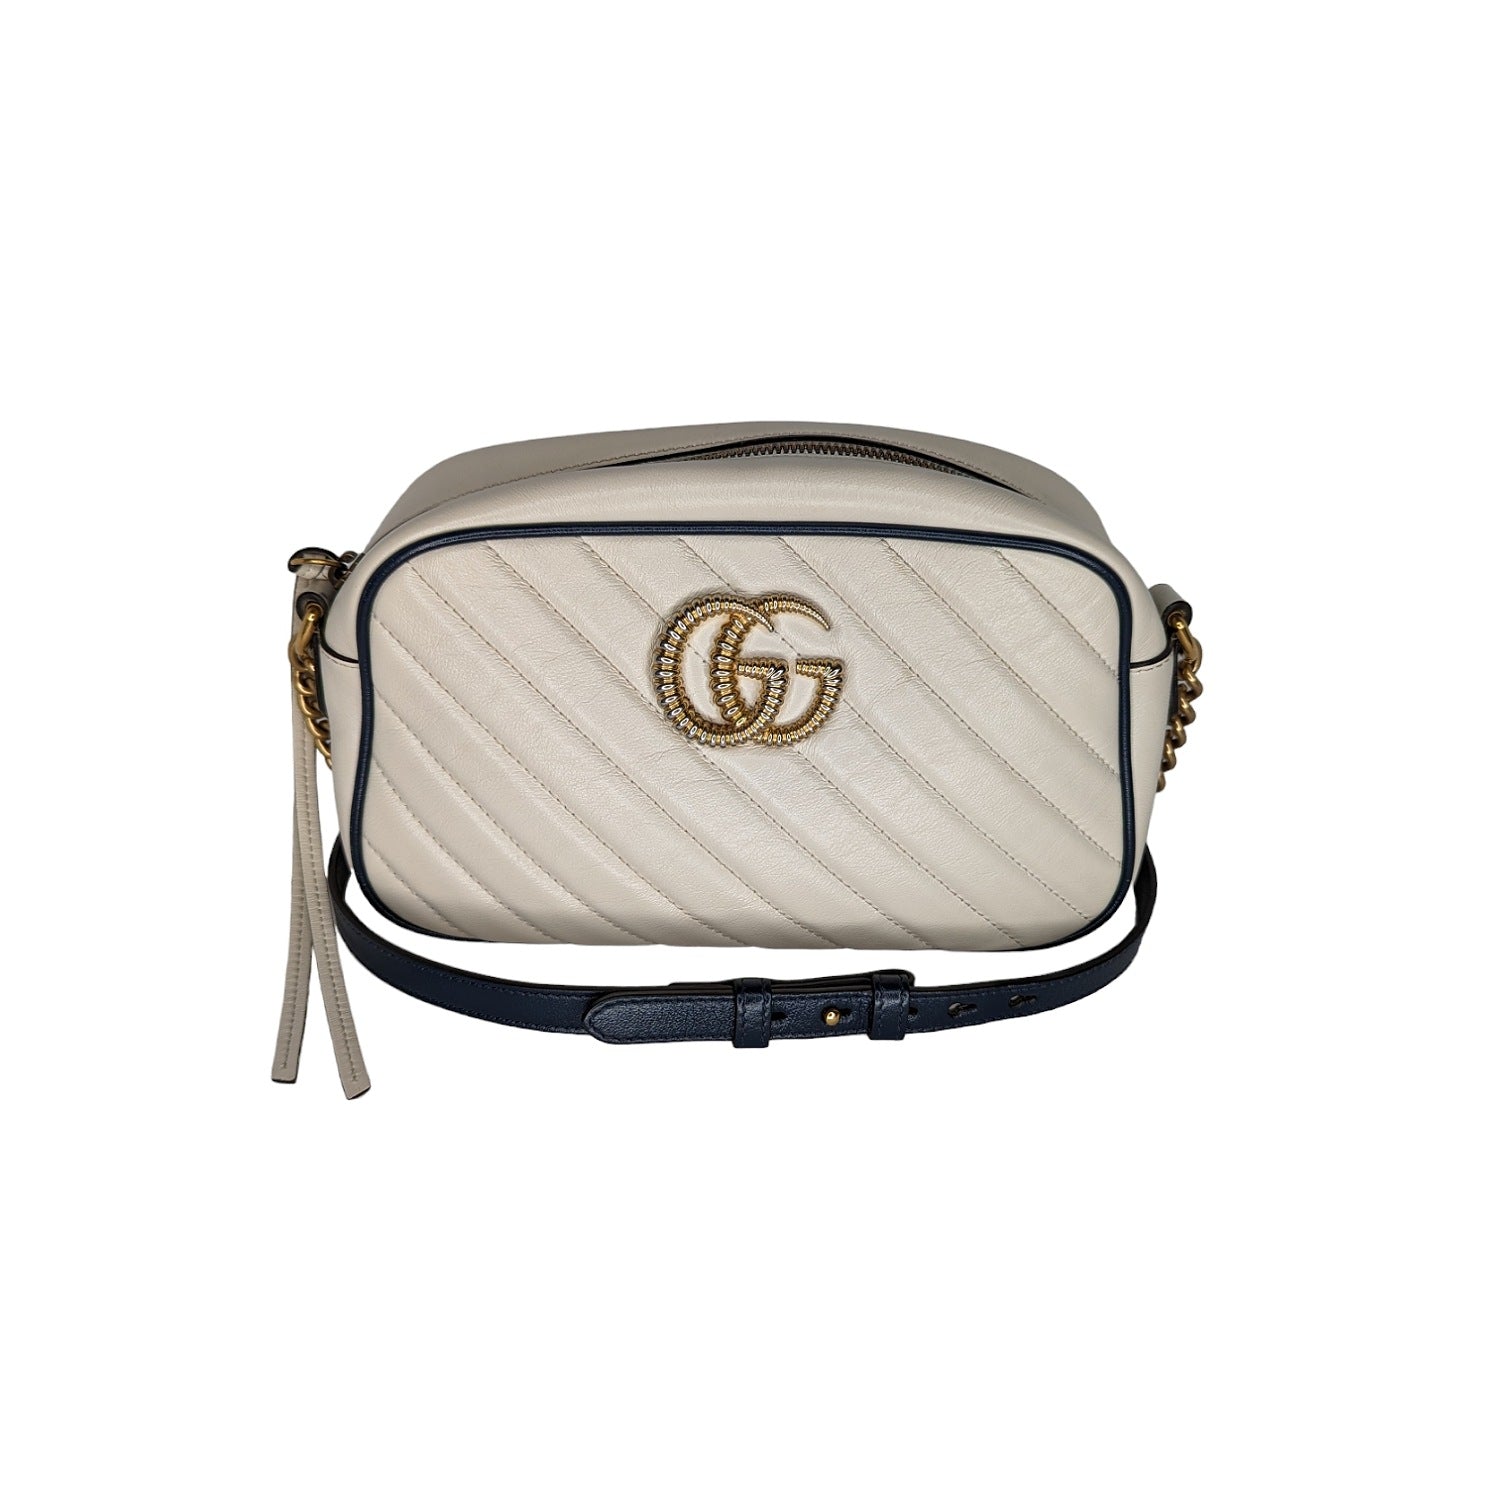 GG Marmont Small Shoulder Bag in White - Gucci